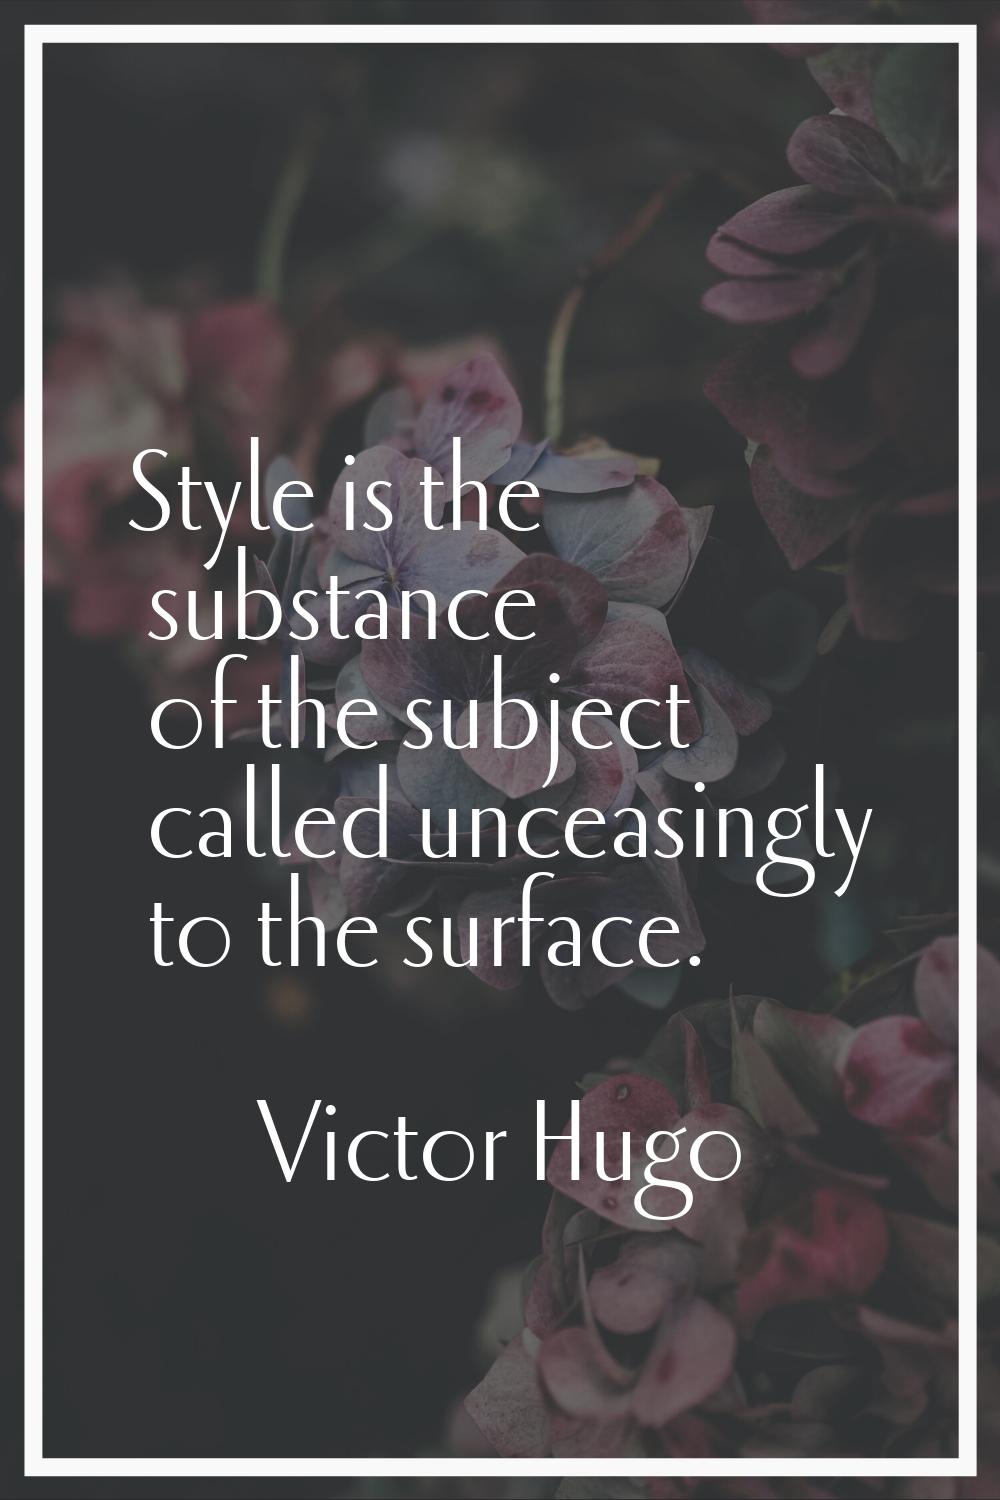 Style is the substance of the subject called unceasingly to the surface.